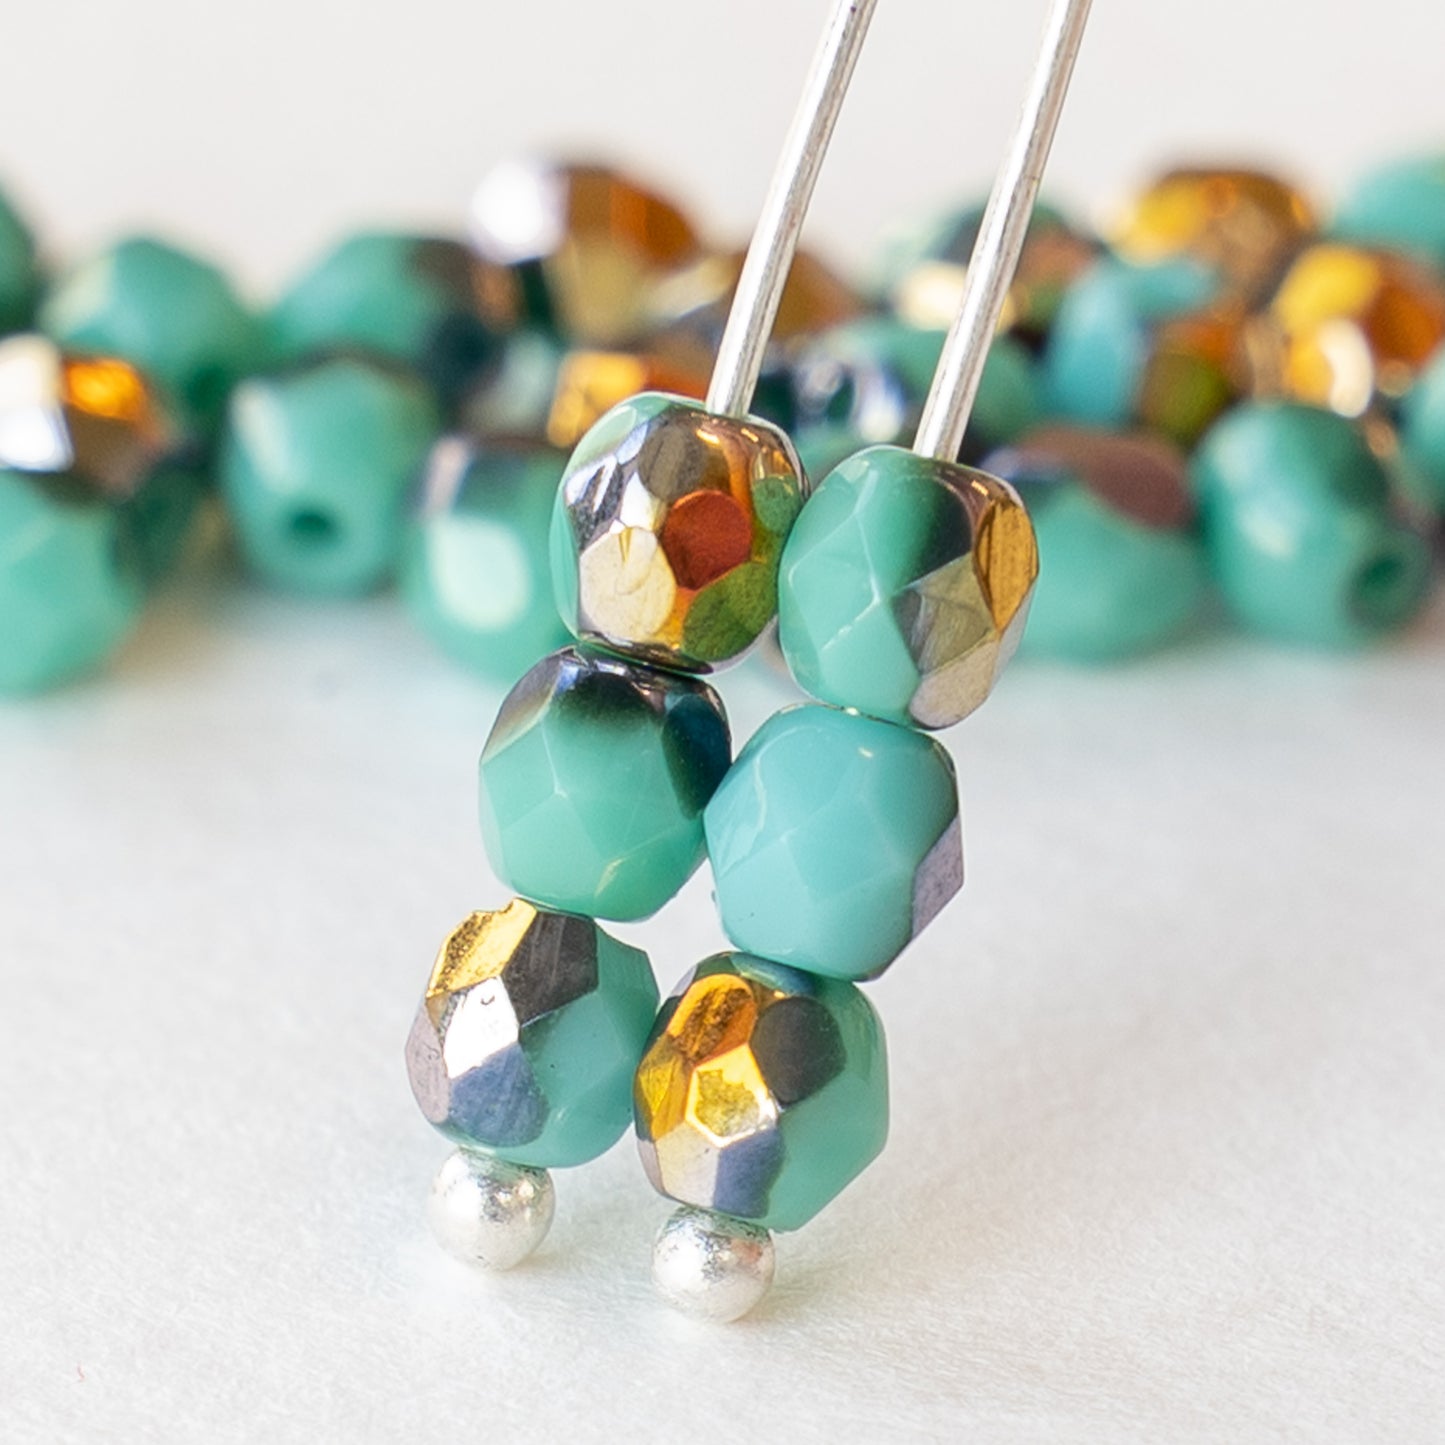 4mm Round Firepolished Beads - Turquoise Gold - 50 beads